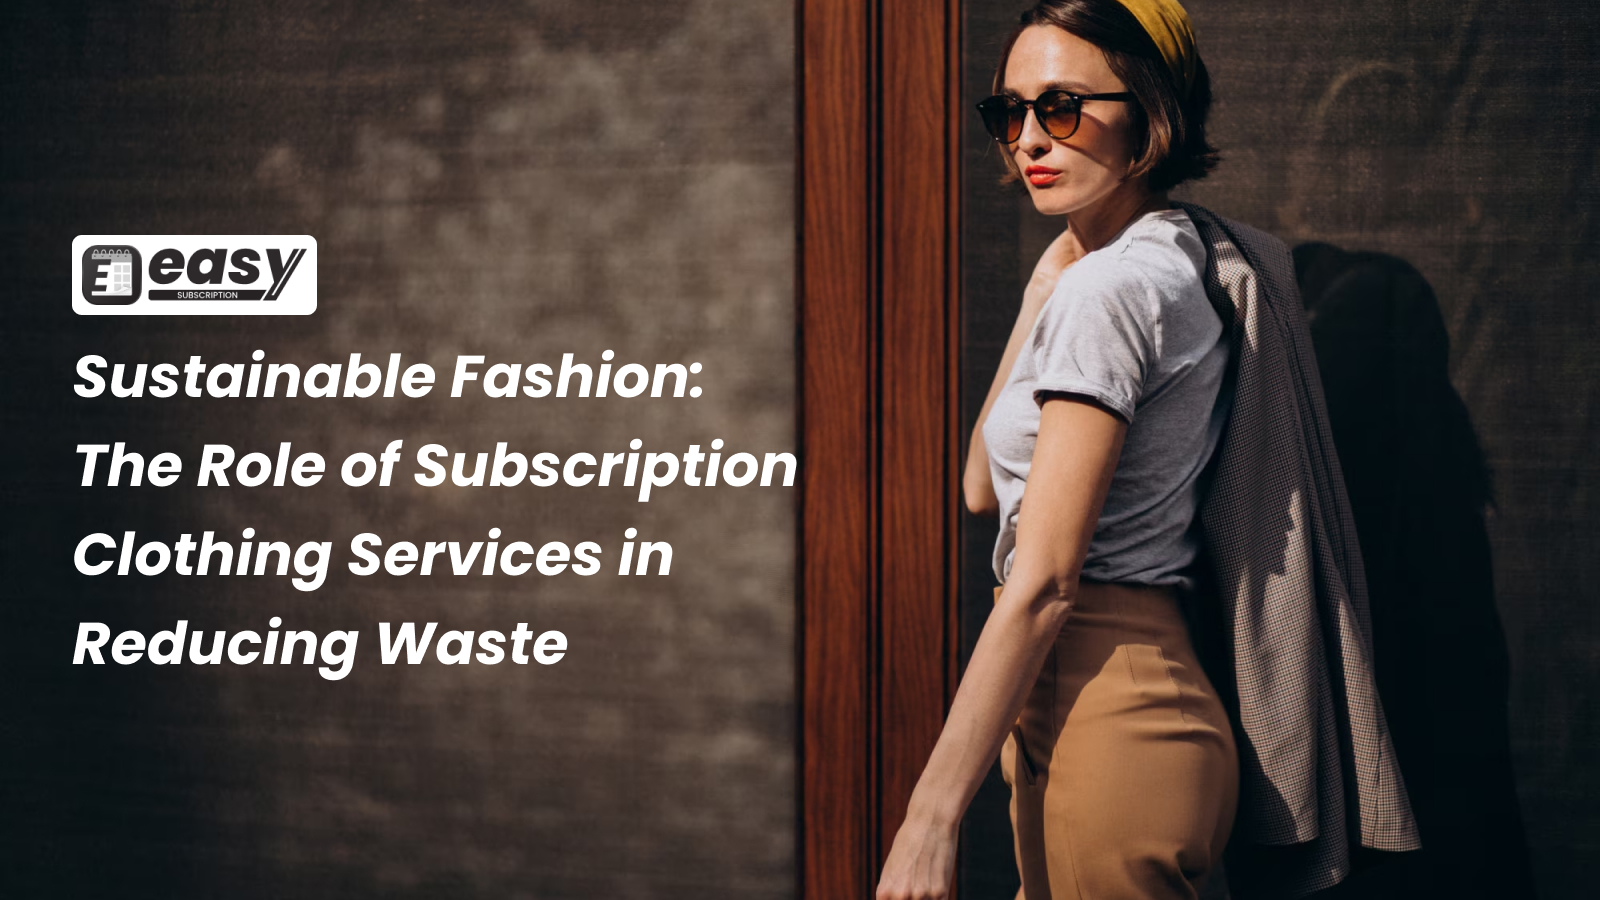 Sustainable Fashion: The Role of Subscription Clothing Services in Reducing Waste